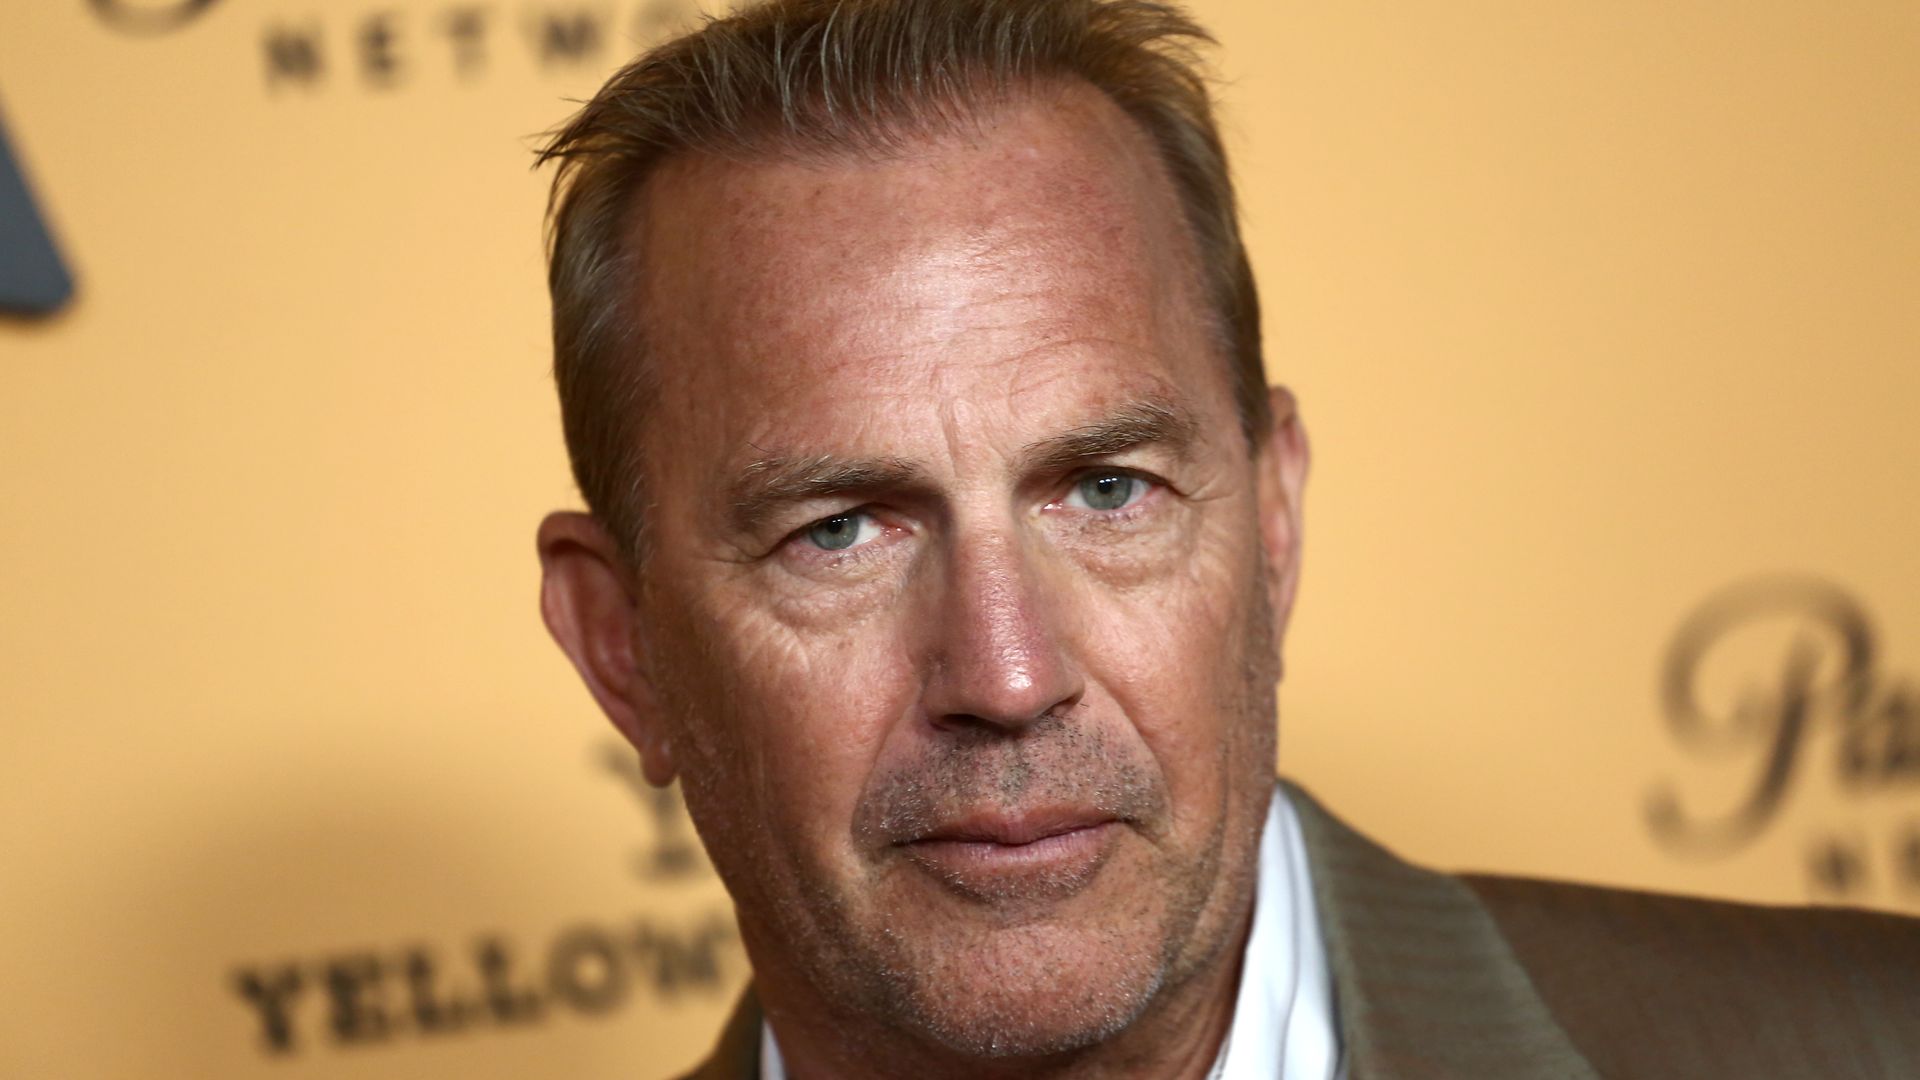 Kevin Costner attends the Premiere Party For Paramount Network's "Yellowstone" Season 2 at Lombardi House on May 30, 2019 in Los Angeles, California